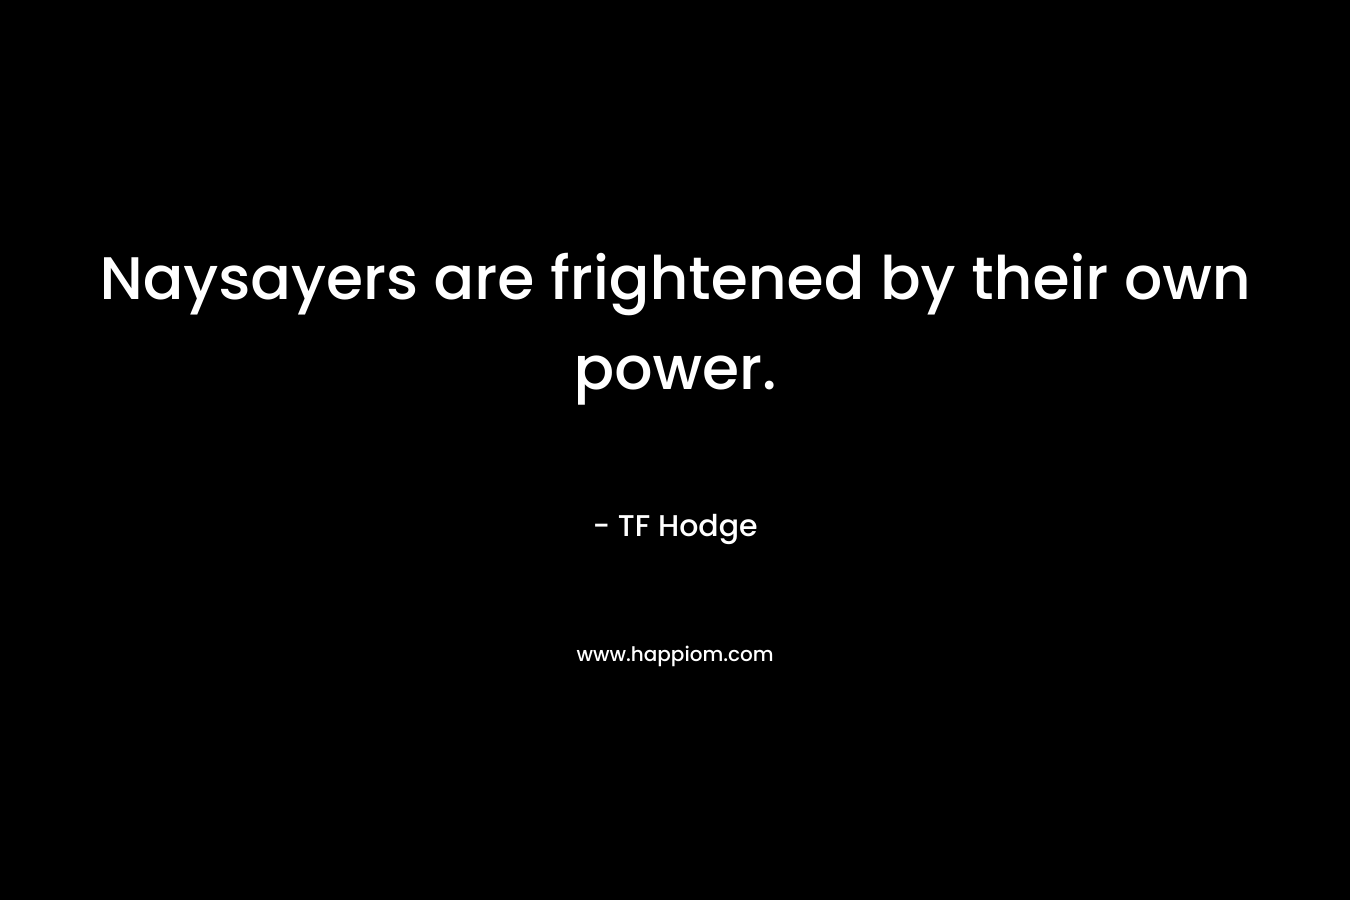 Naysayers are frightened by their own power.